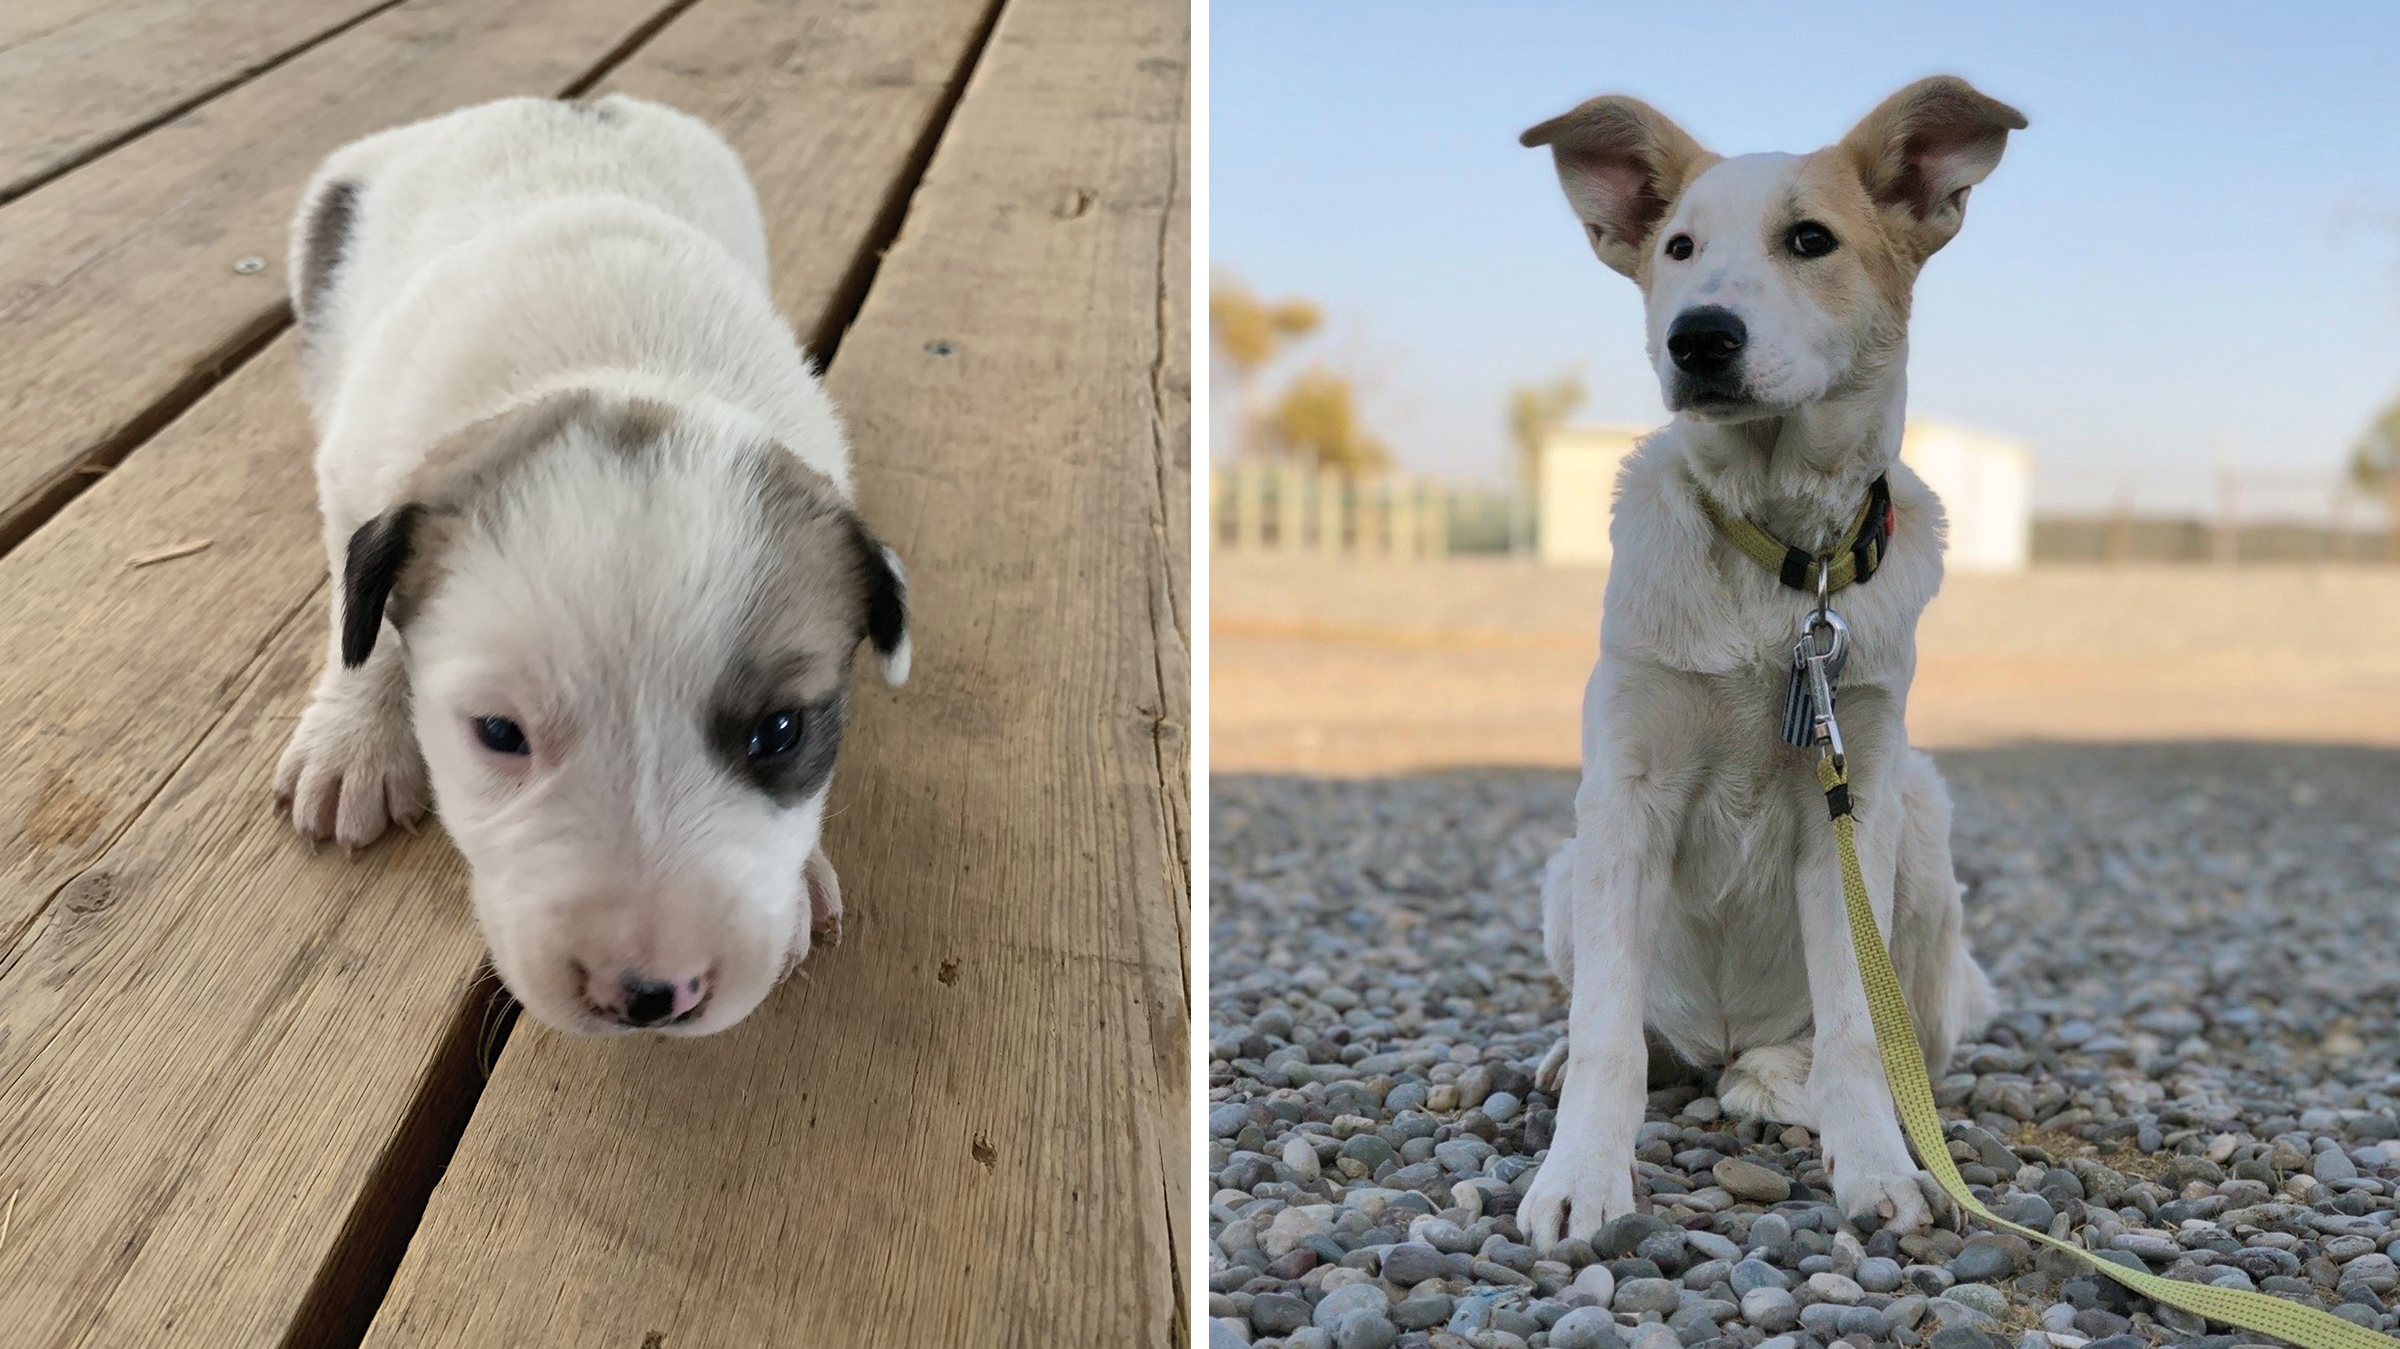 Sully the dog as a newborn puppy (left) and at a few months of age.